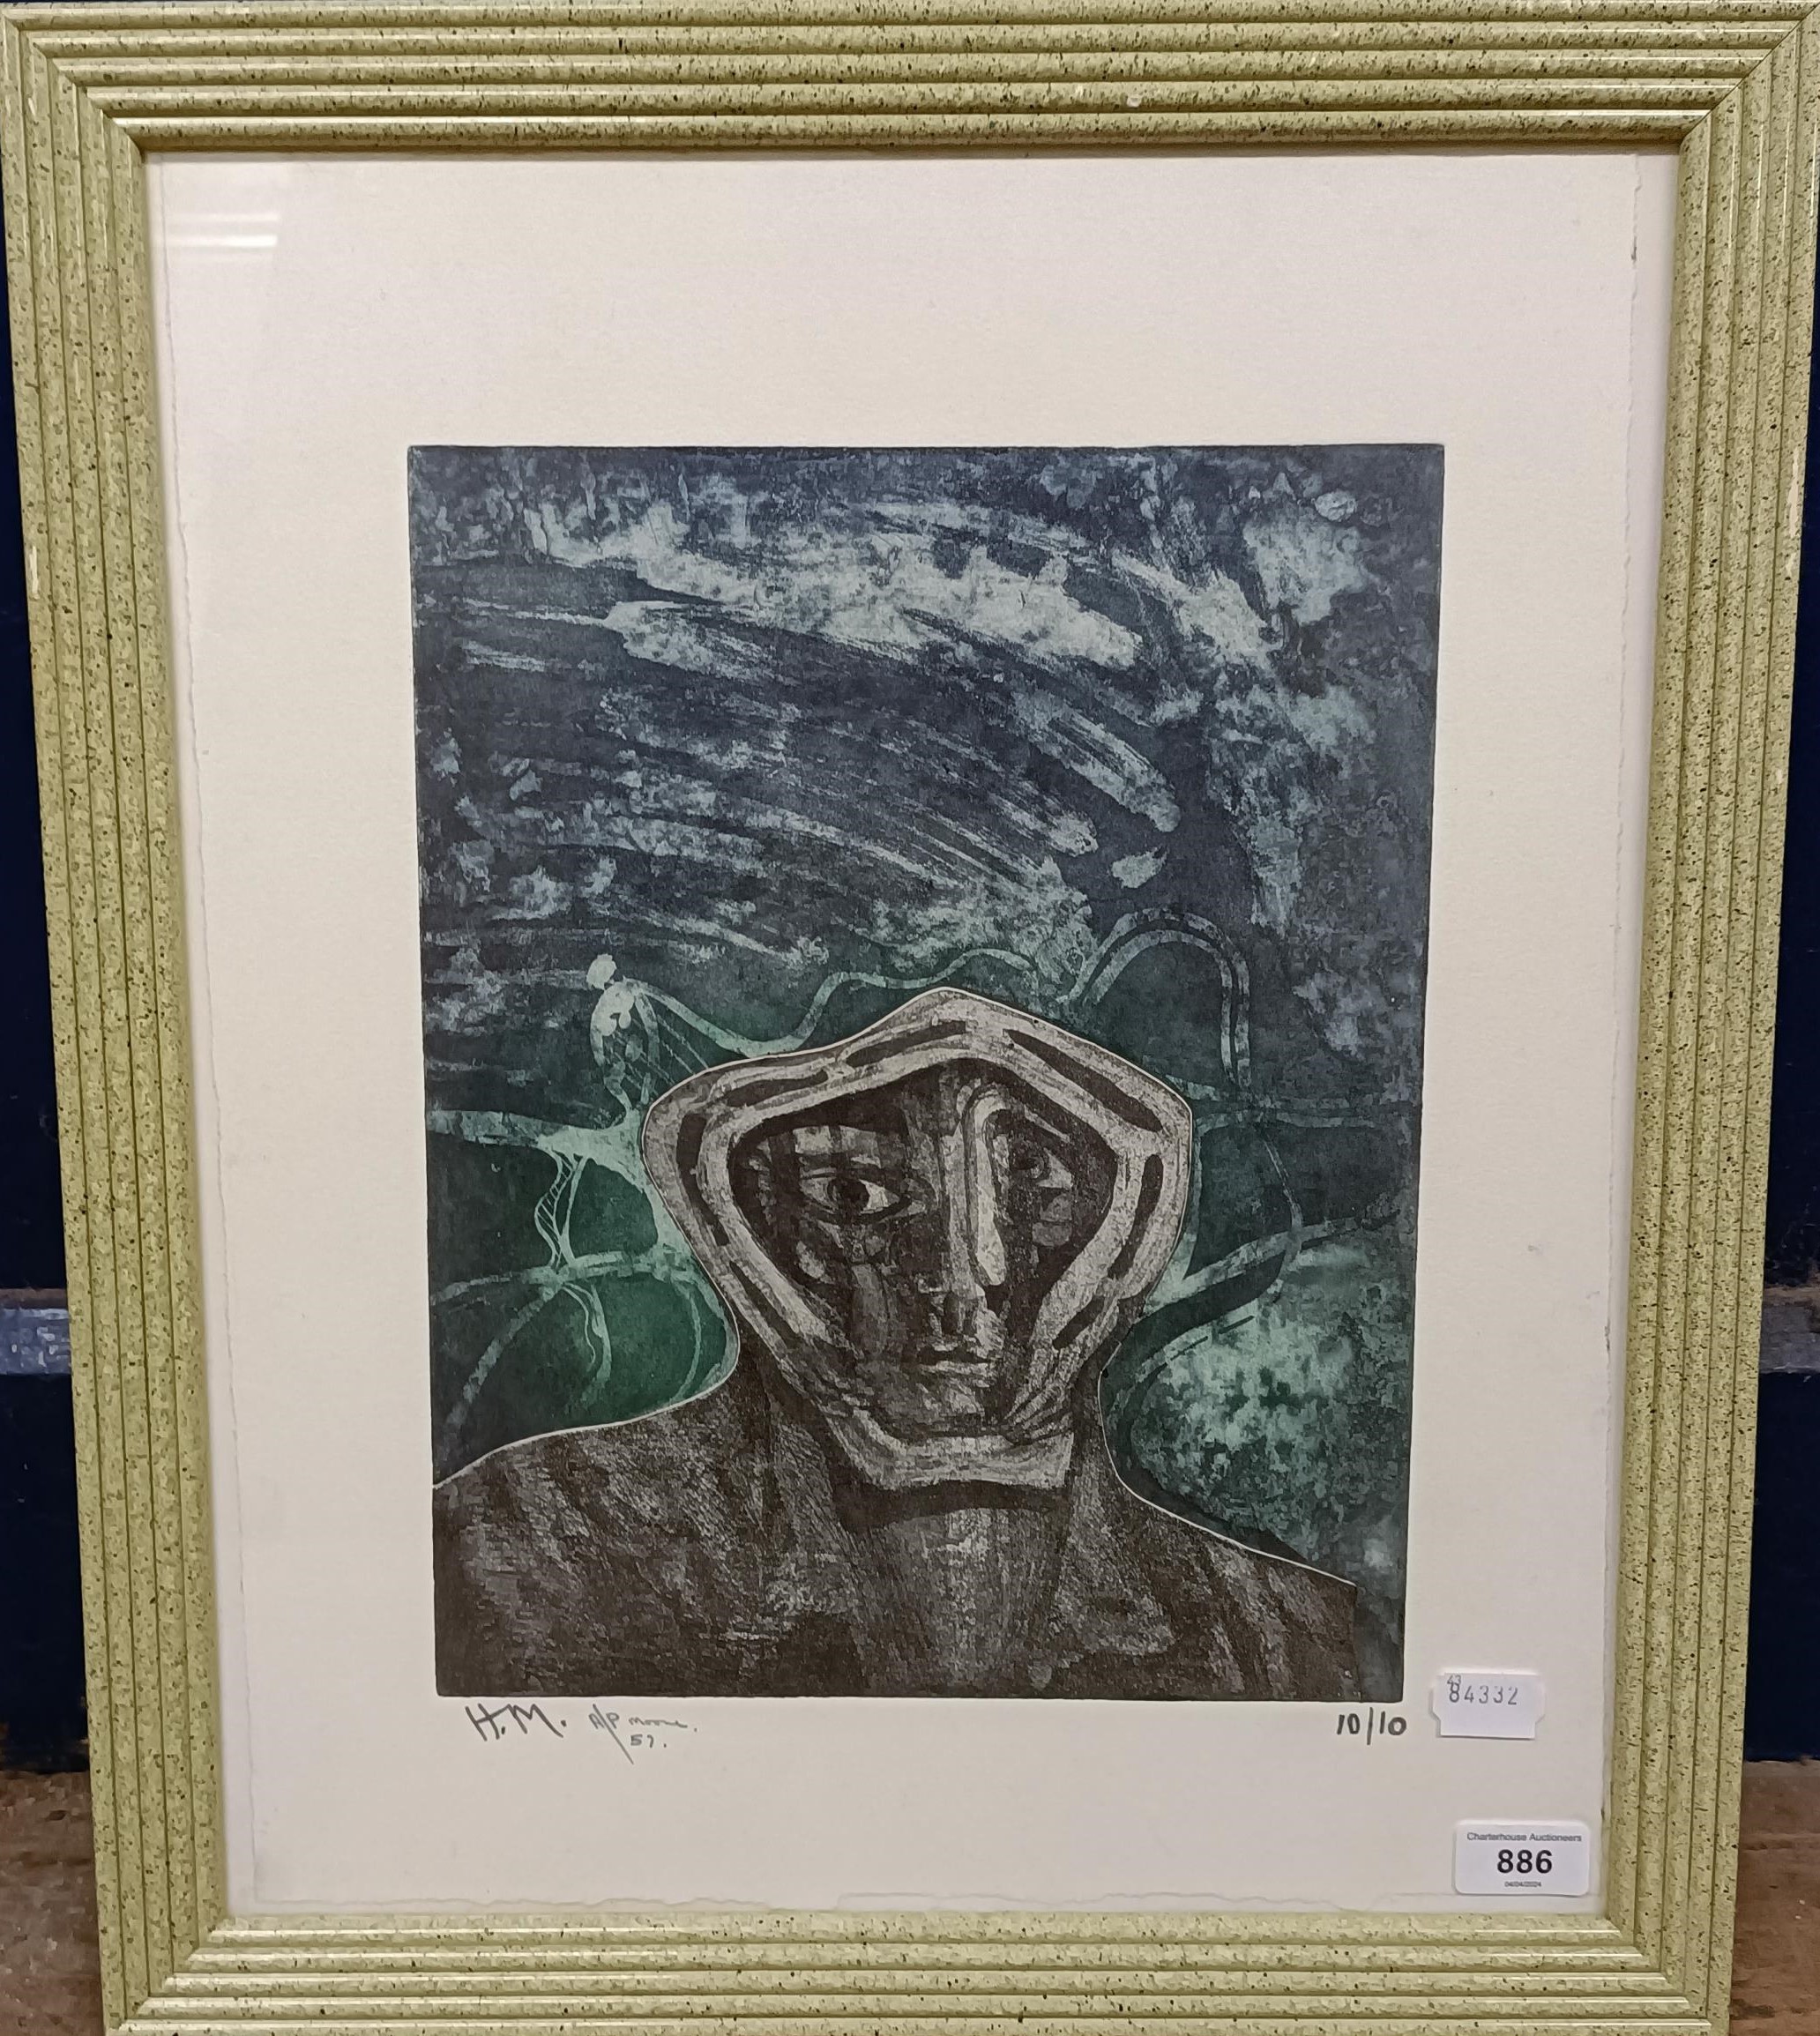 20th century, English school, study of a figure, limited edition print, 10/10, initialled HM in - Image 2 of 4